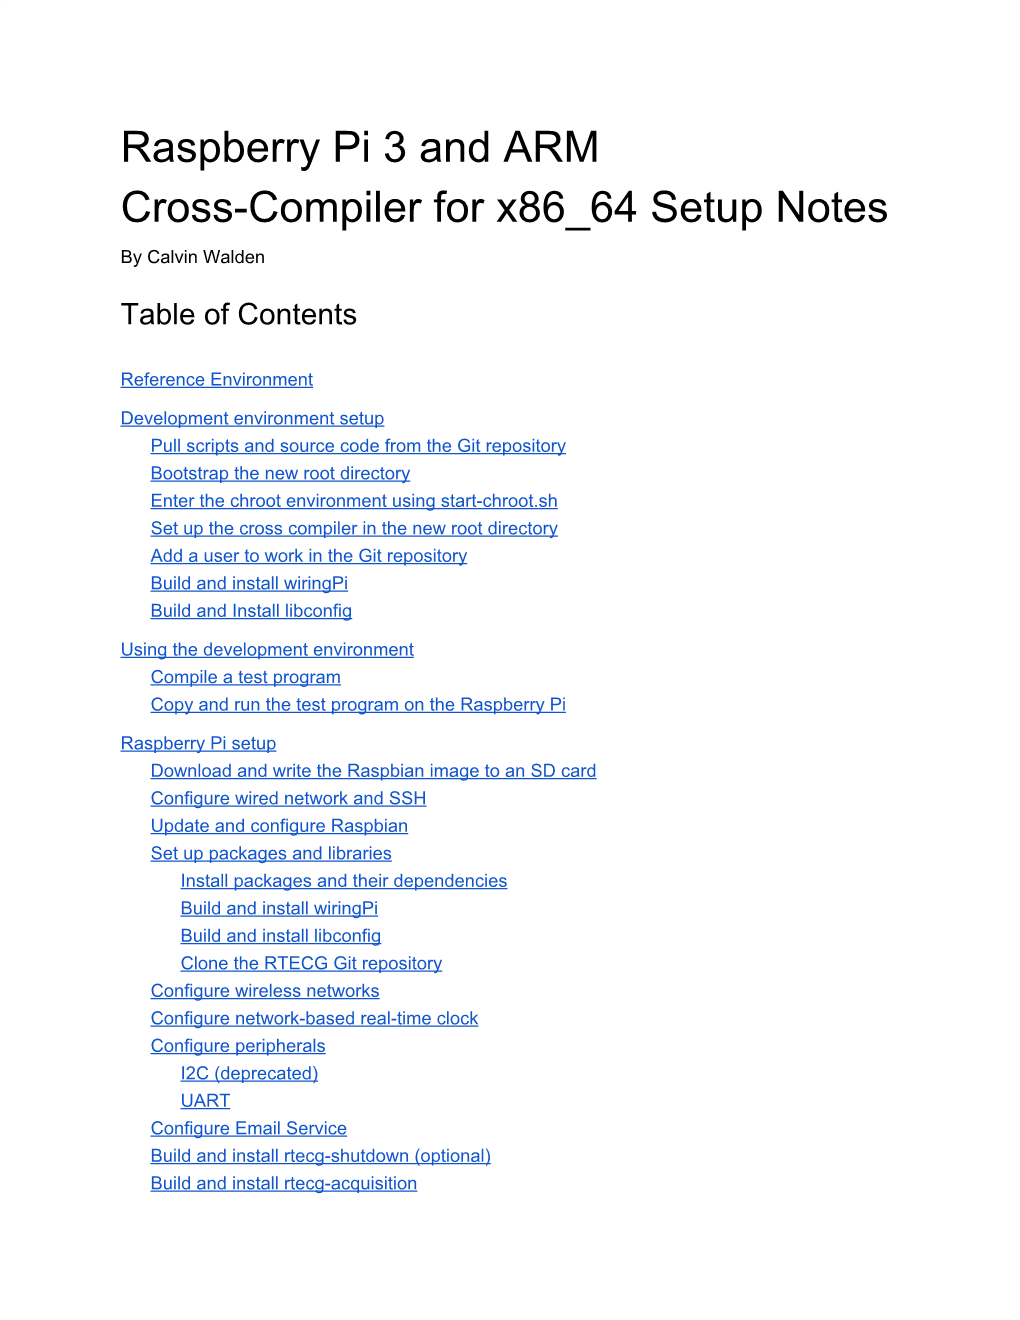 Raspberry Pi 3 and ARM Cross-Compiler for X86 64 Setup Notes by Calvin Walden